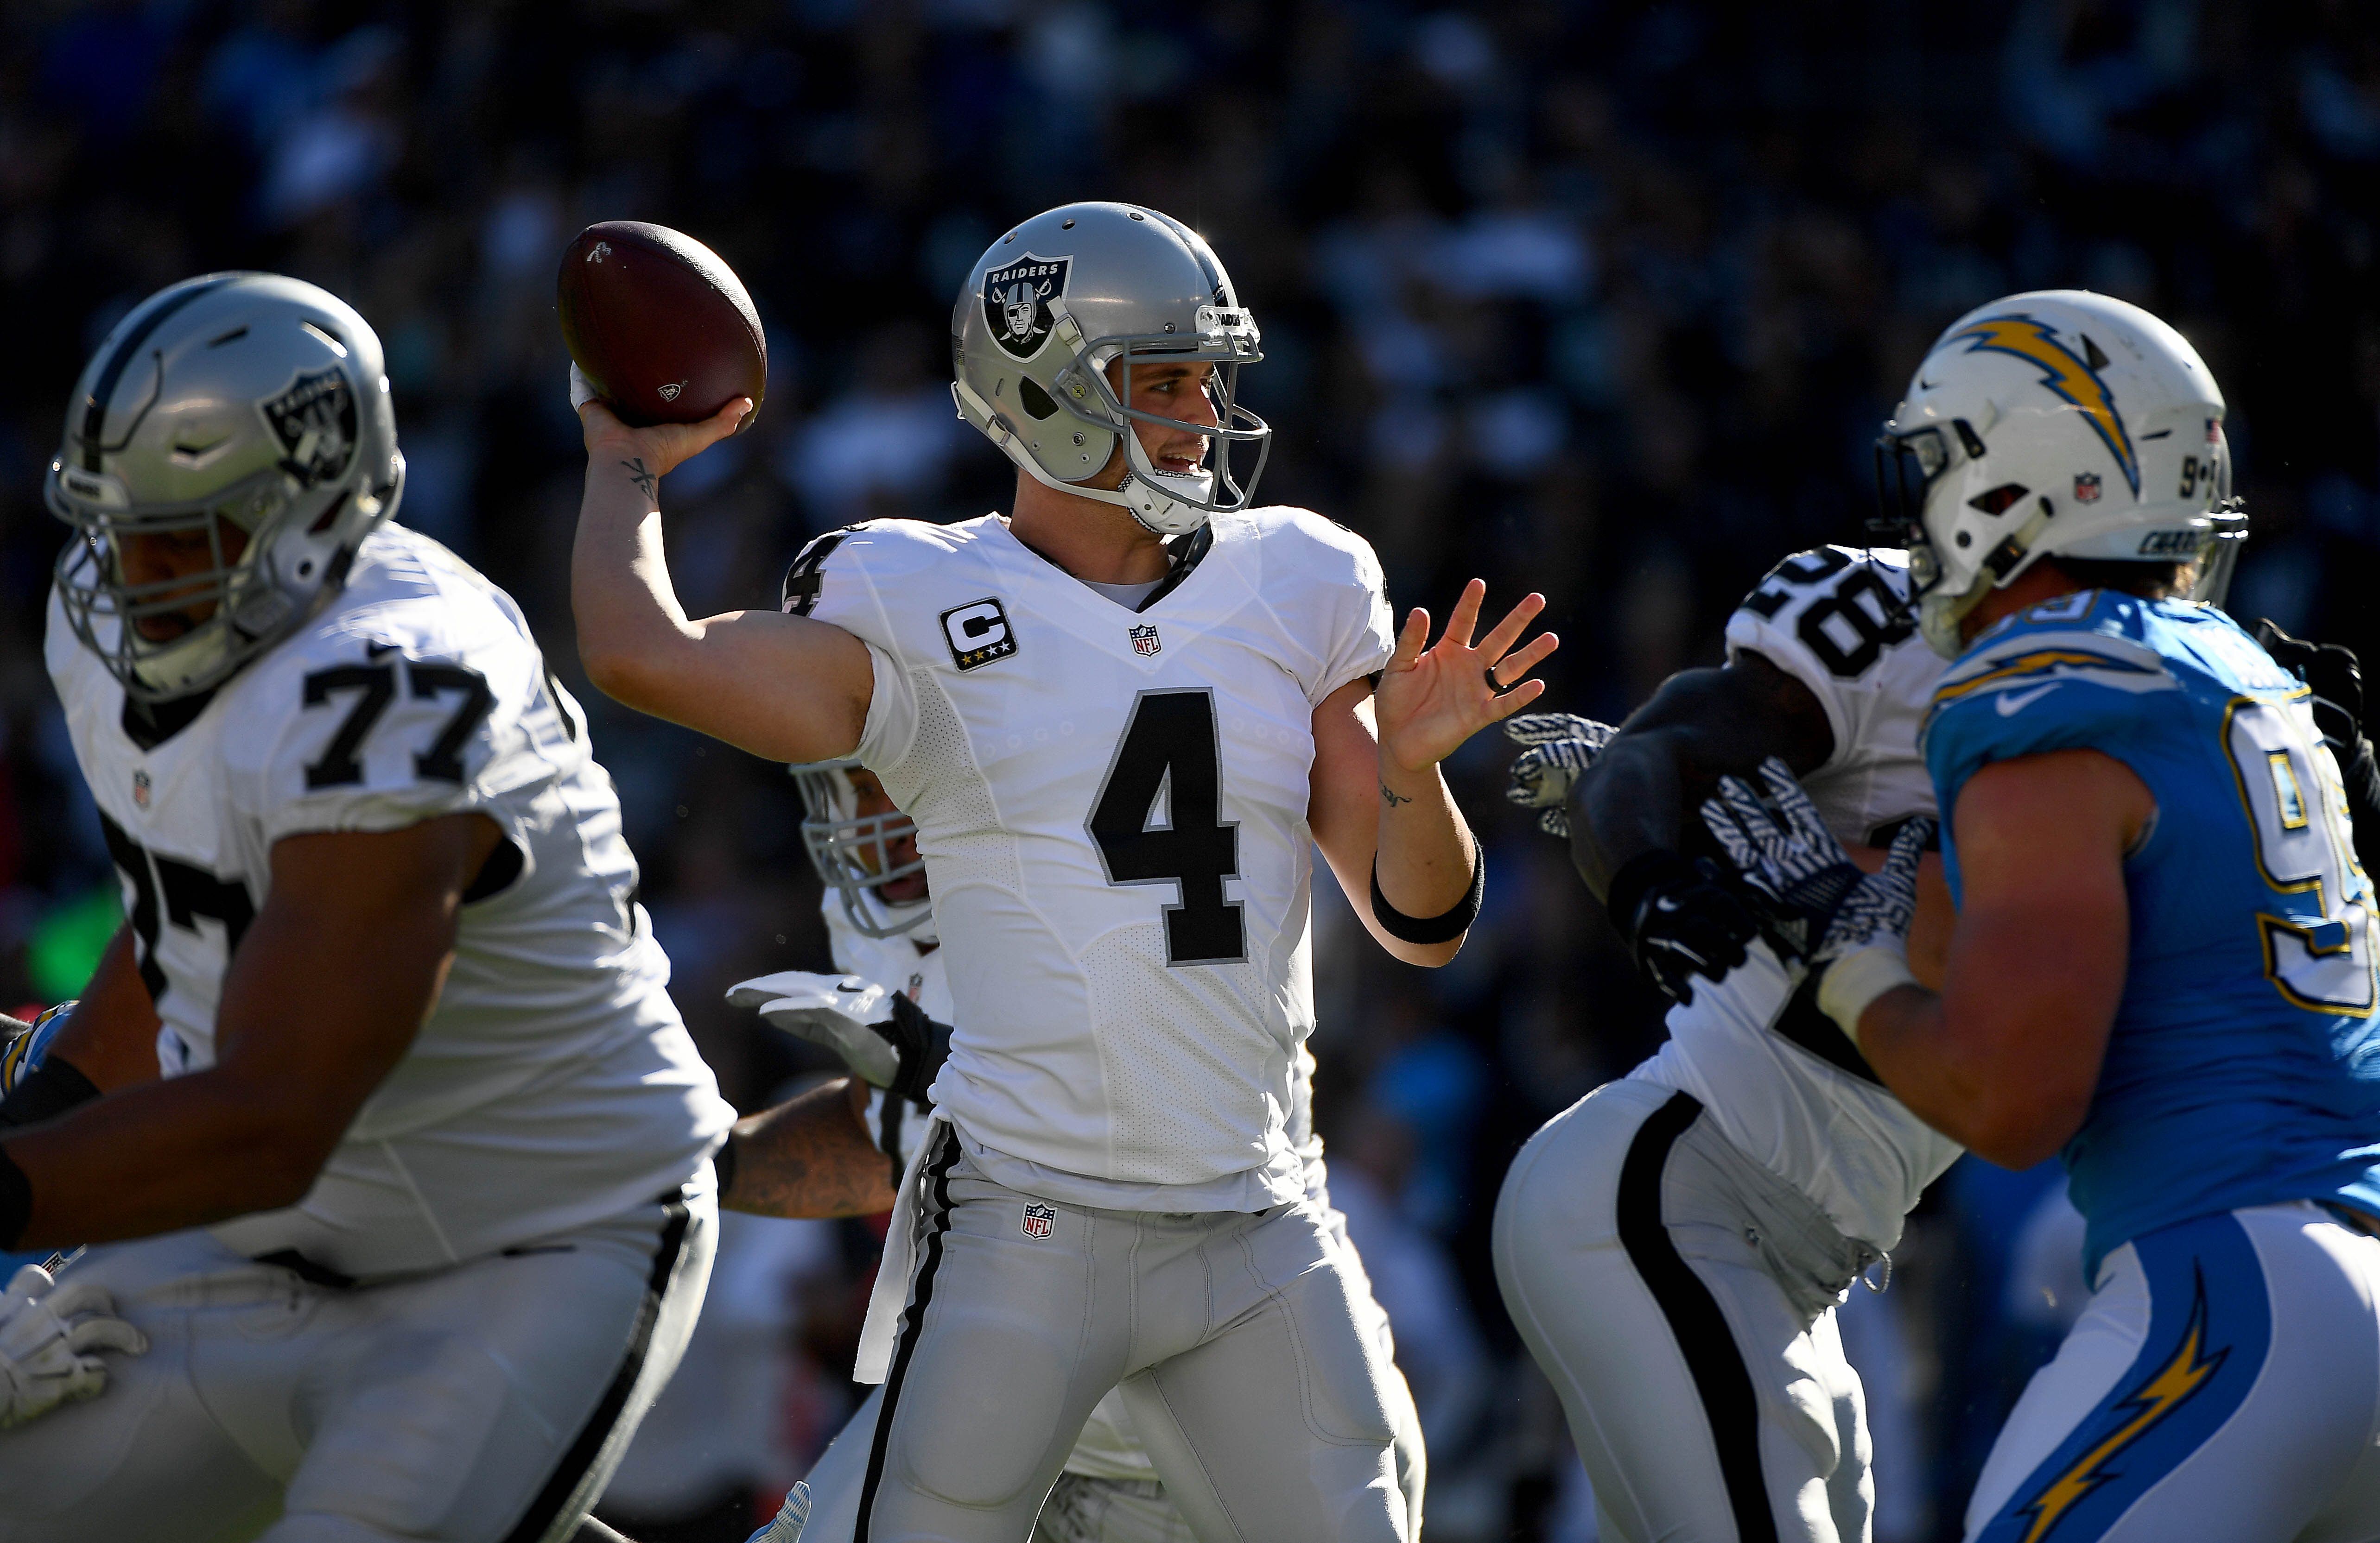 SAN DIEGO, CA - DECEMBER 18:  Quarterback Derek Carr #4 of the Oakland Raiders throws from the pocket during his team\'s game against the San Diego Chargers at Qualcomm Stadium on December 18, 2016 in San Diego, California. (Photo by Donald Miralle/Getty Images)